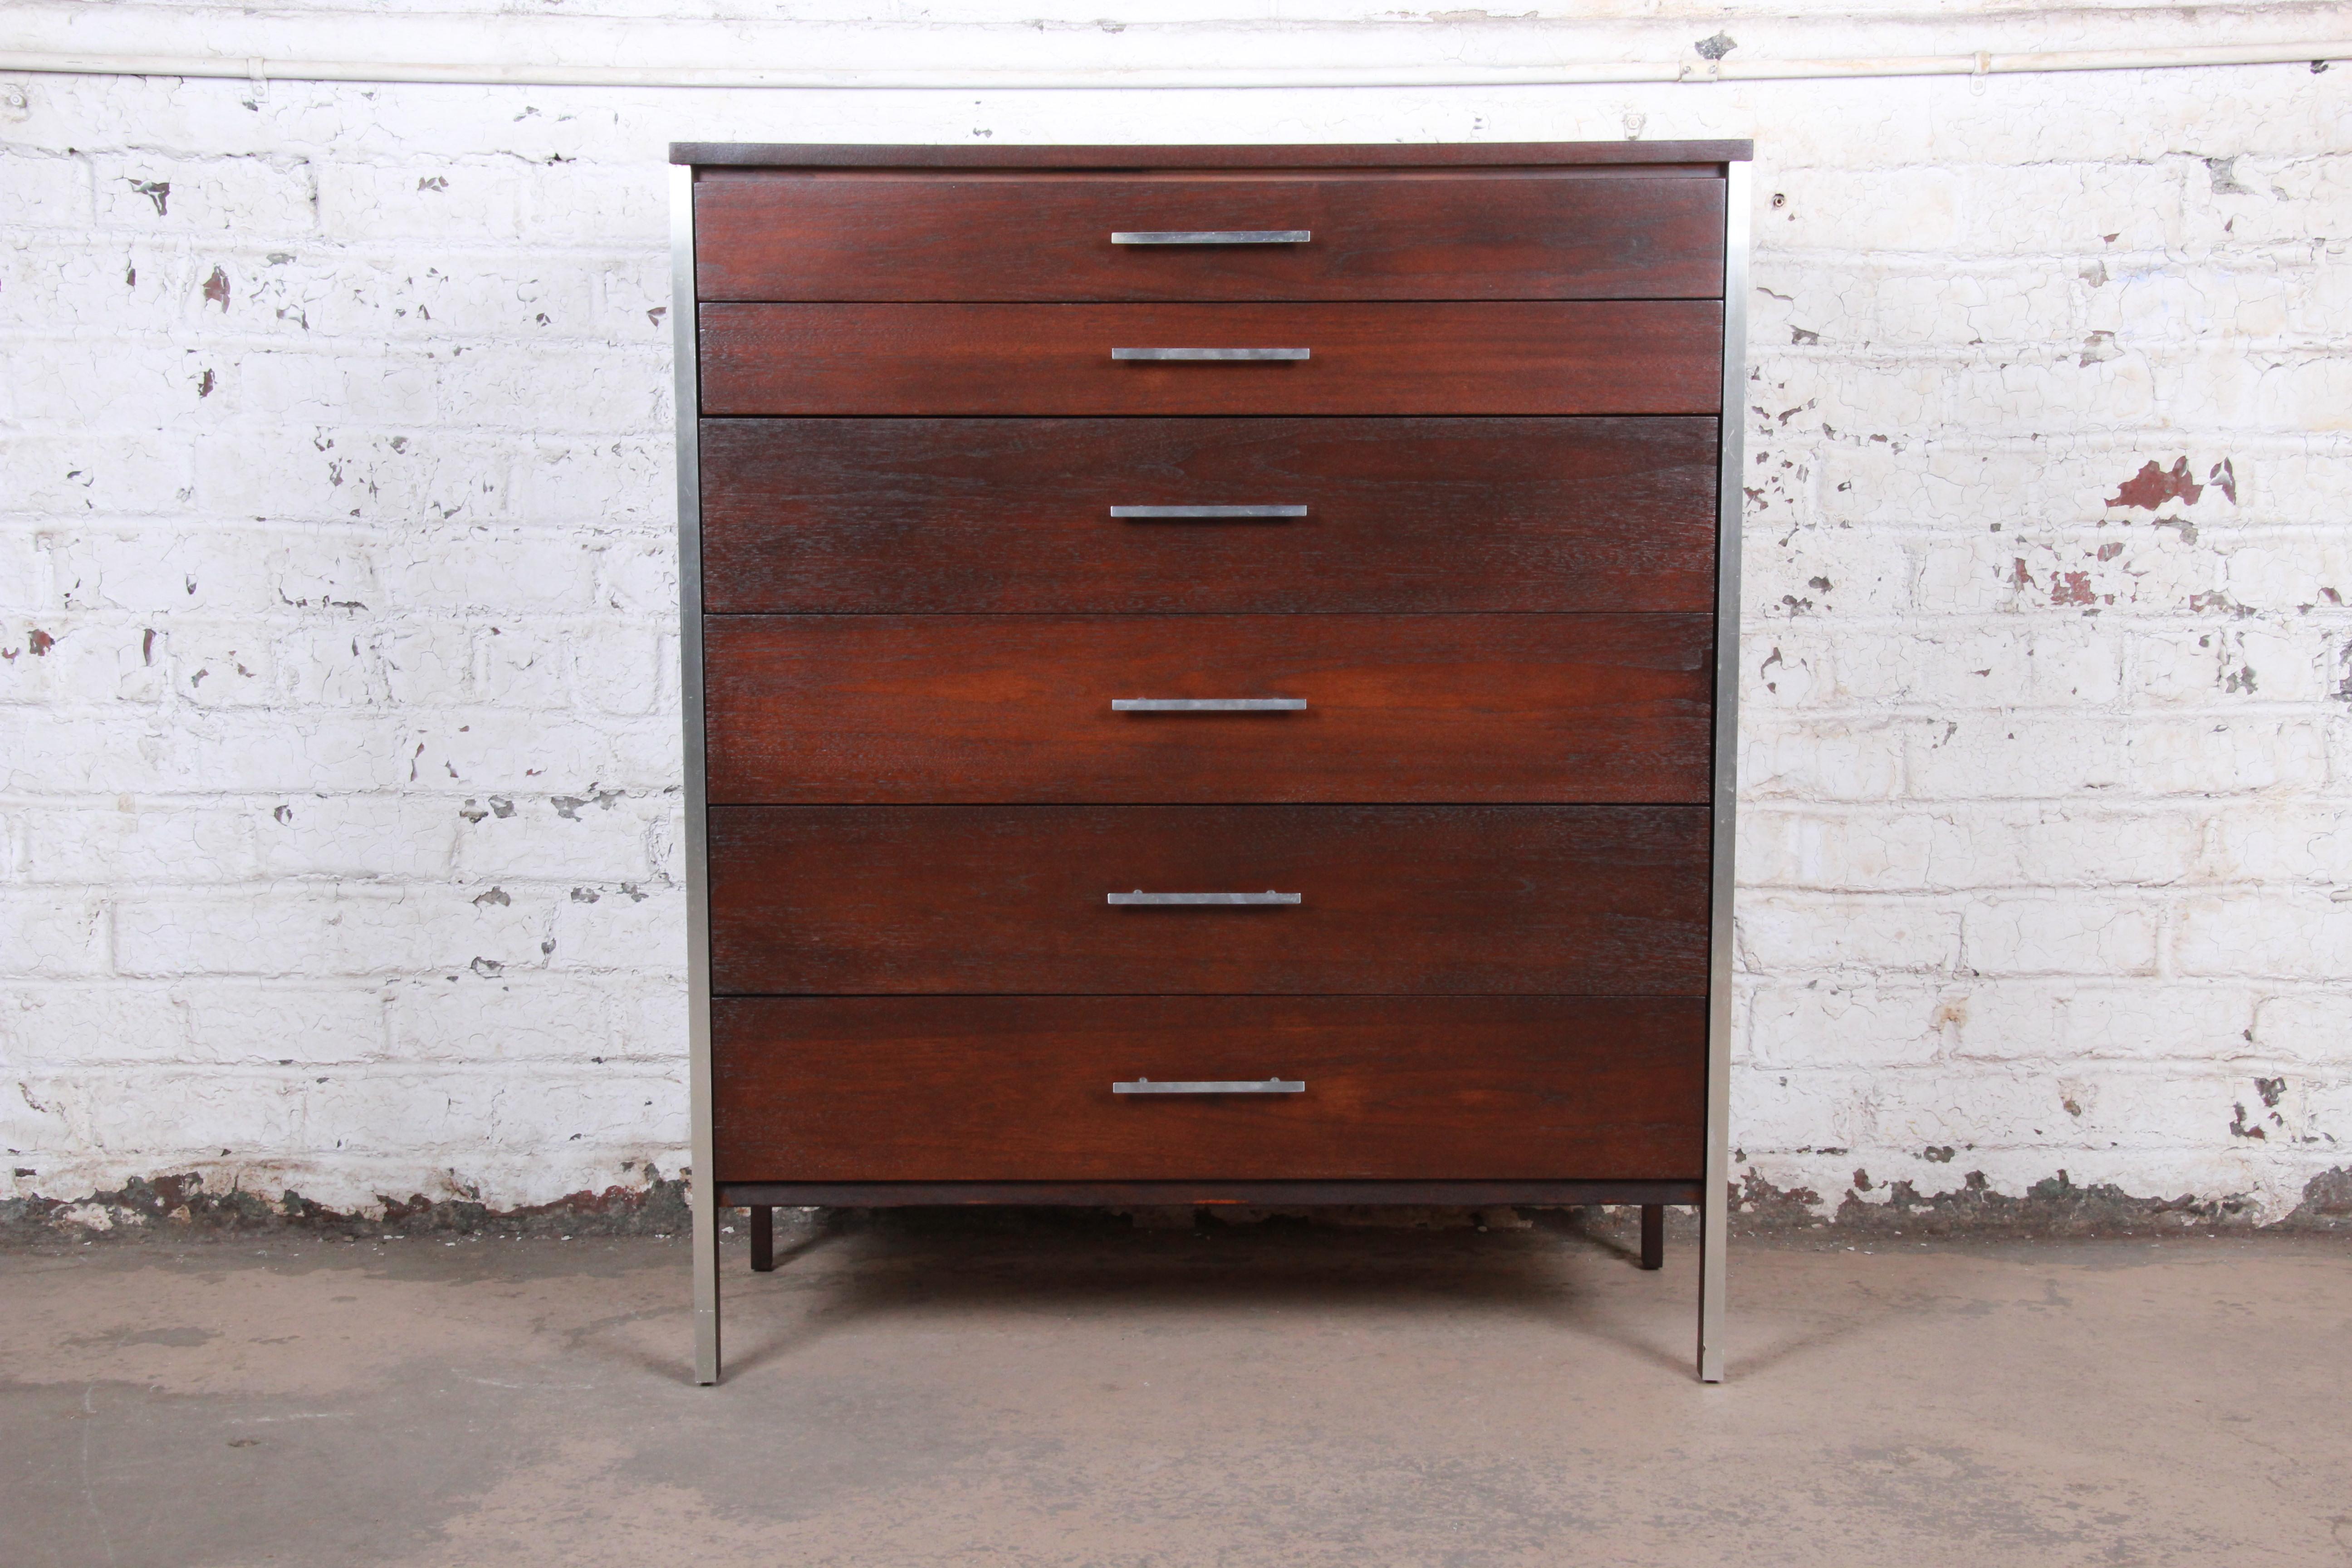 An exceptional Mid-Century Modern six-drawer highboy dresser

Designed by Paul McCobb for Calvin Furniture 